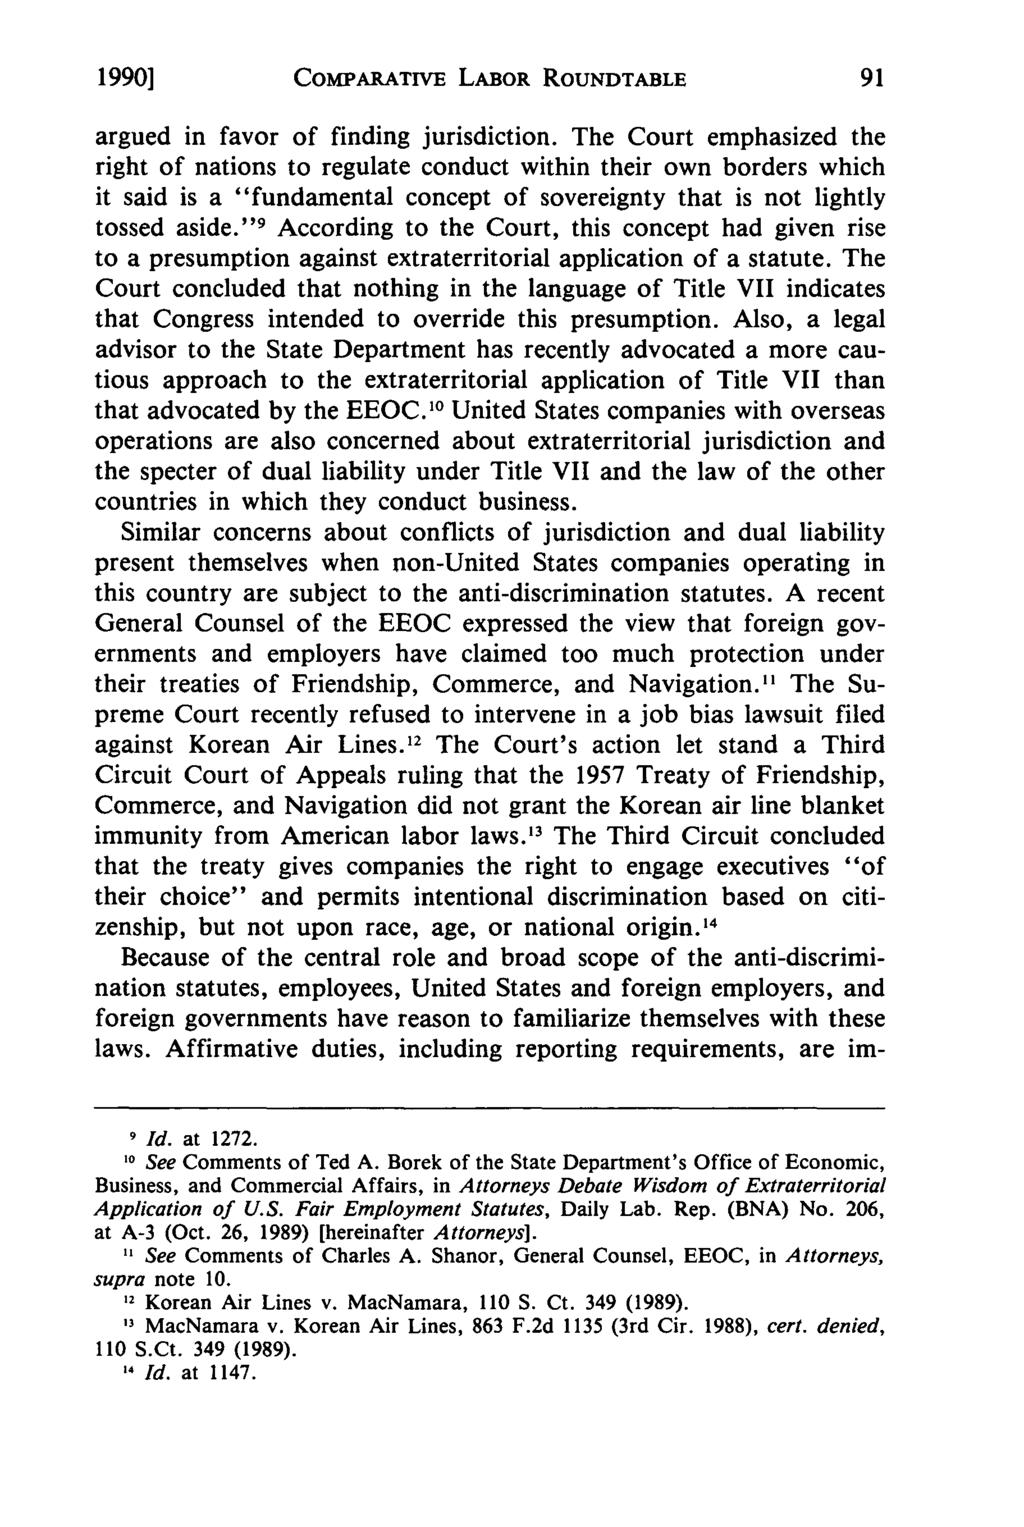 1990] COMPARATIVE LABOR ROUNDTABLE argued in favor of finding jurisdiction.